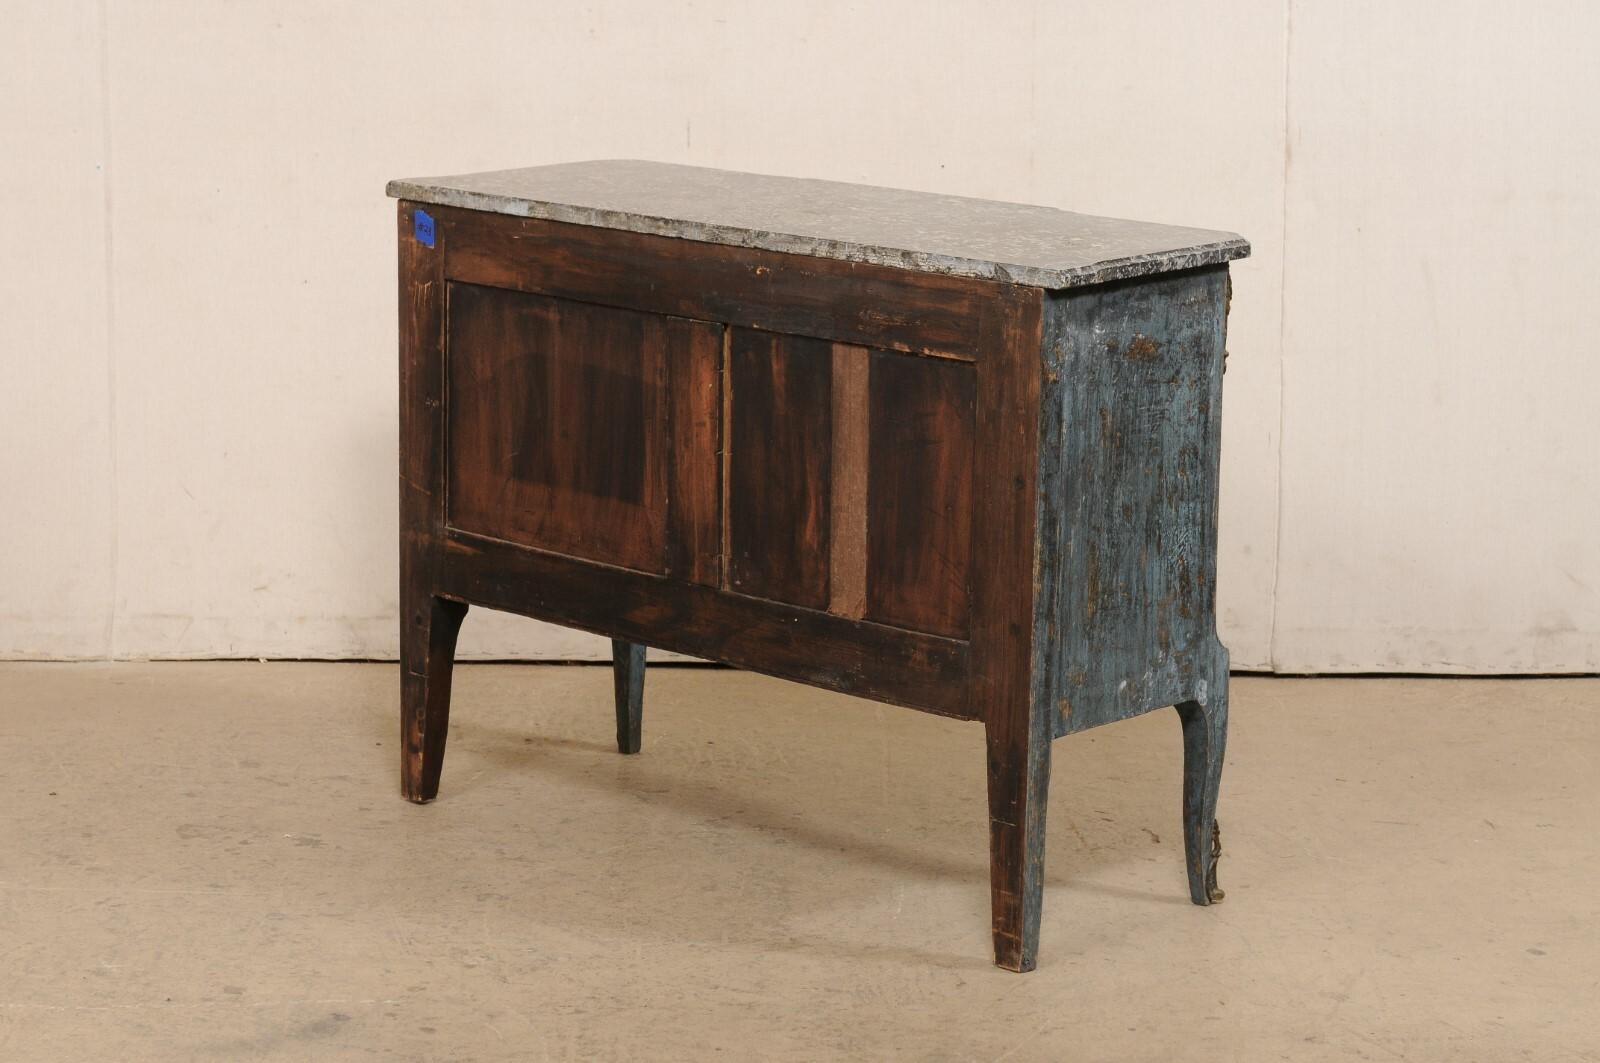 Antique French Neoclassical Style Commode w/Black Marble Top & Scraped Finish For Sale 3